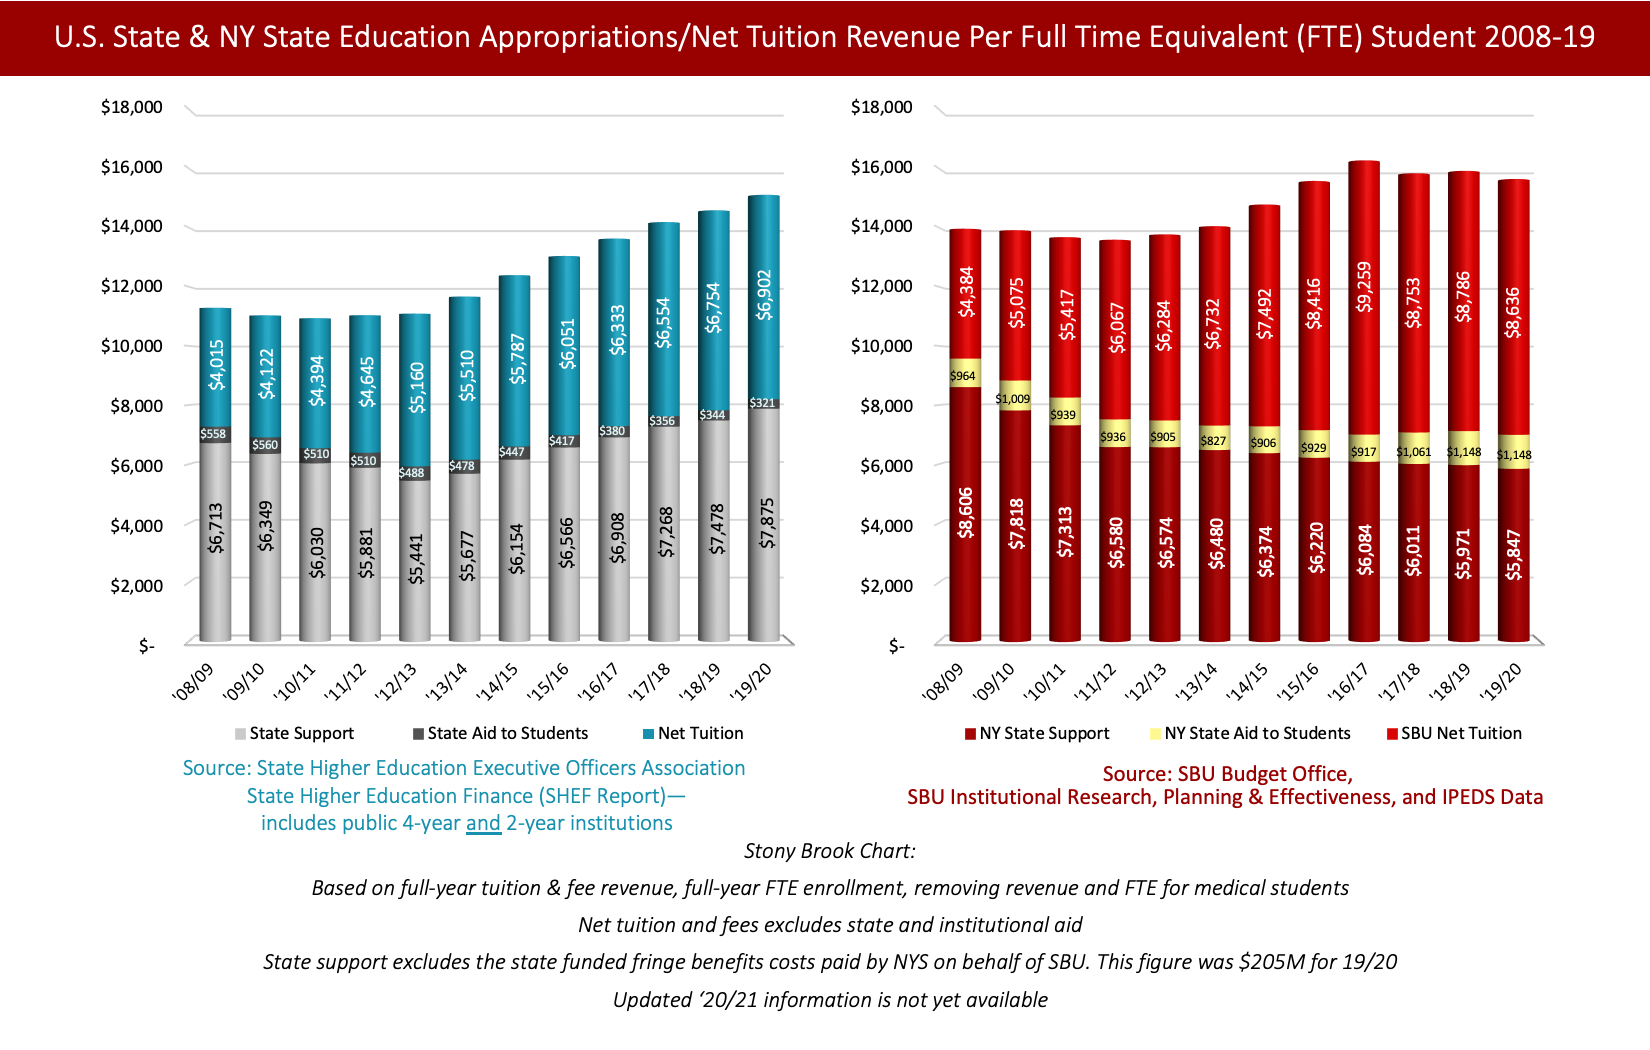 Left bar chart shows increasing state support and tuition across the U.S. resulting in an overall increase of nearly $4,000 per Full Time Equivalent (FTE) student since 2008/09. Footnote reads: Source: State Higher Education Executive Officers Association  State Higher Education Finance (SHEF Report)— includes public 4-year and 2-year institutions. Right bar chart shows New York's declining state support with increasing tuition, resulting in less than $2,000 increase to funding per FTE in New York since 2008/09. Footnote reads: Source: SBU Budget Office,  SBU Institutional Research, Planning & Effectiveness, and IPEDS Data. Center footnote reads: Stony Brook Chart: Based on full-year tuition & fee revenue, full-year FTE enrollment, removing revenue and FTE for medical students Net tuition and fees excludes state and institutional aid State support excludes the state funded fringe benefits costs paid by NYS on behalf of SBU. This figure is $206M for 18/19 Updated ‘20/21 information is not yet available.  